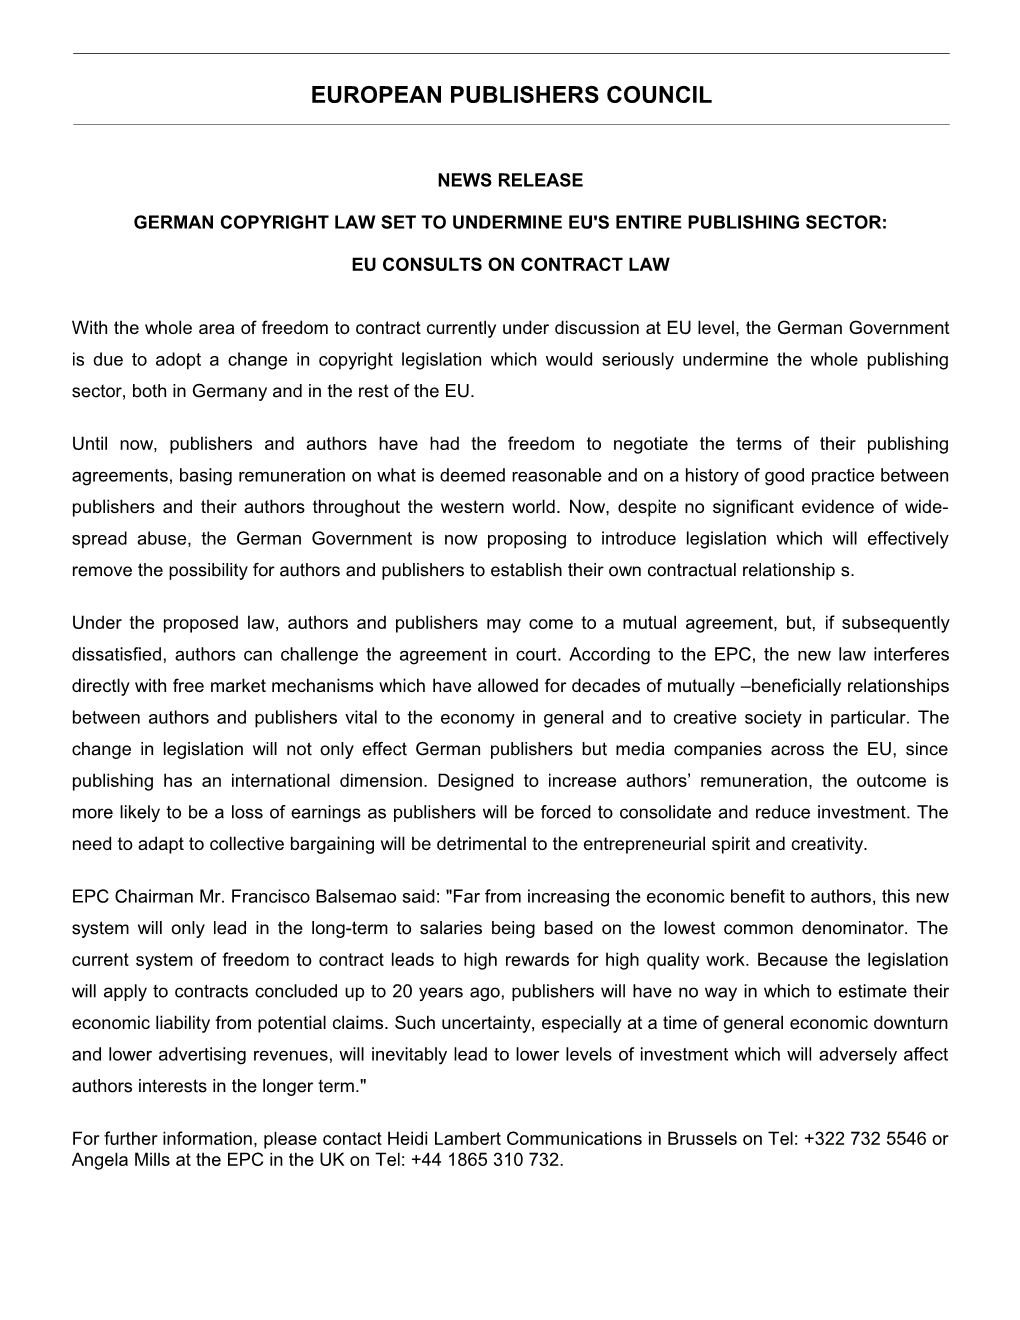 Draft News Release German Copyright Law Set to Undermine Eu's Entire Publishing Sector